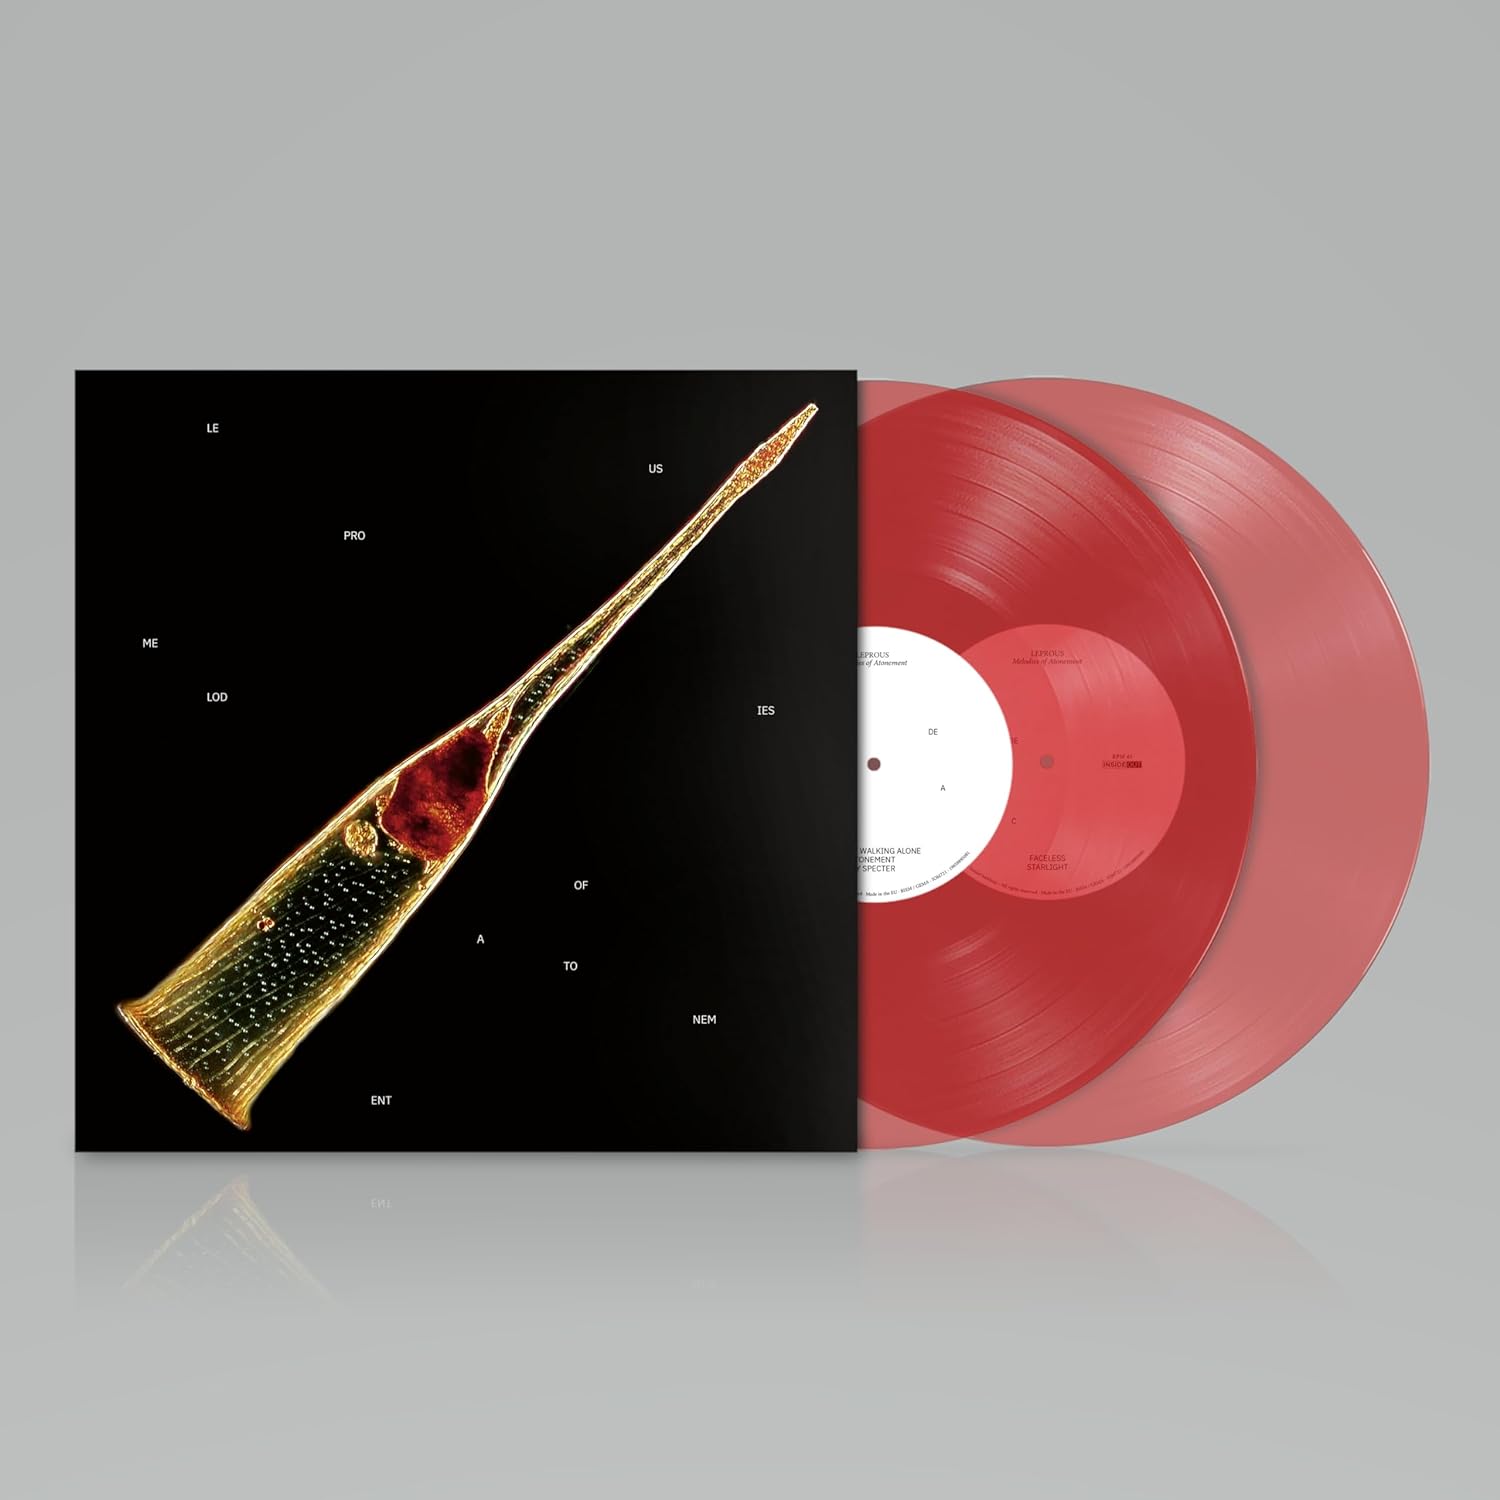 Leprous "Melodies Of Atonement" Gatefold 2x12" Transparent Red Vinyl - PRE-ORDER